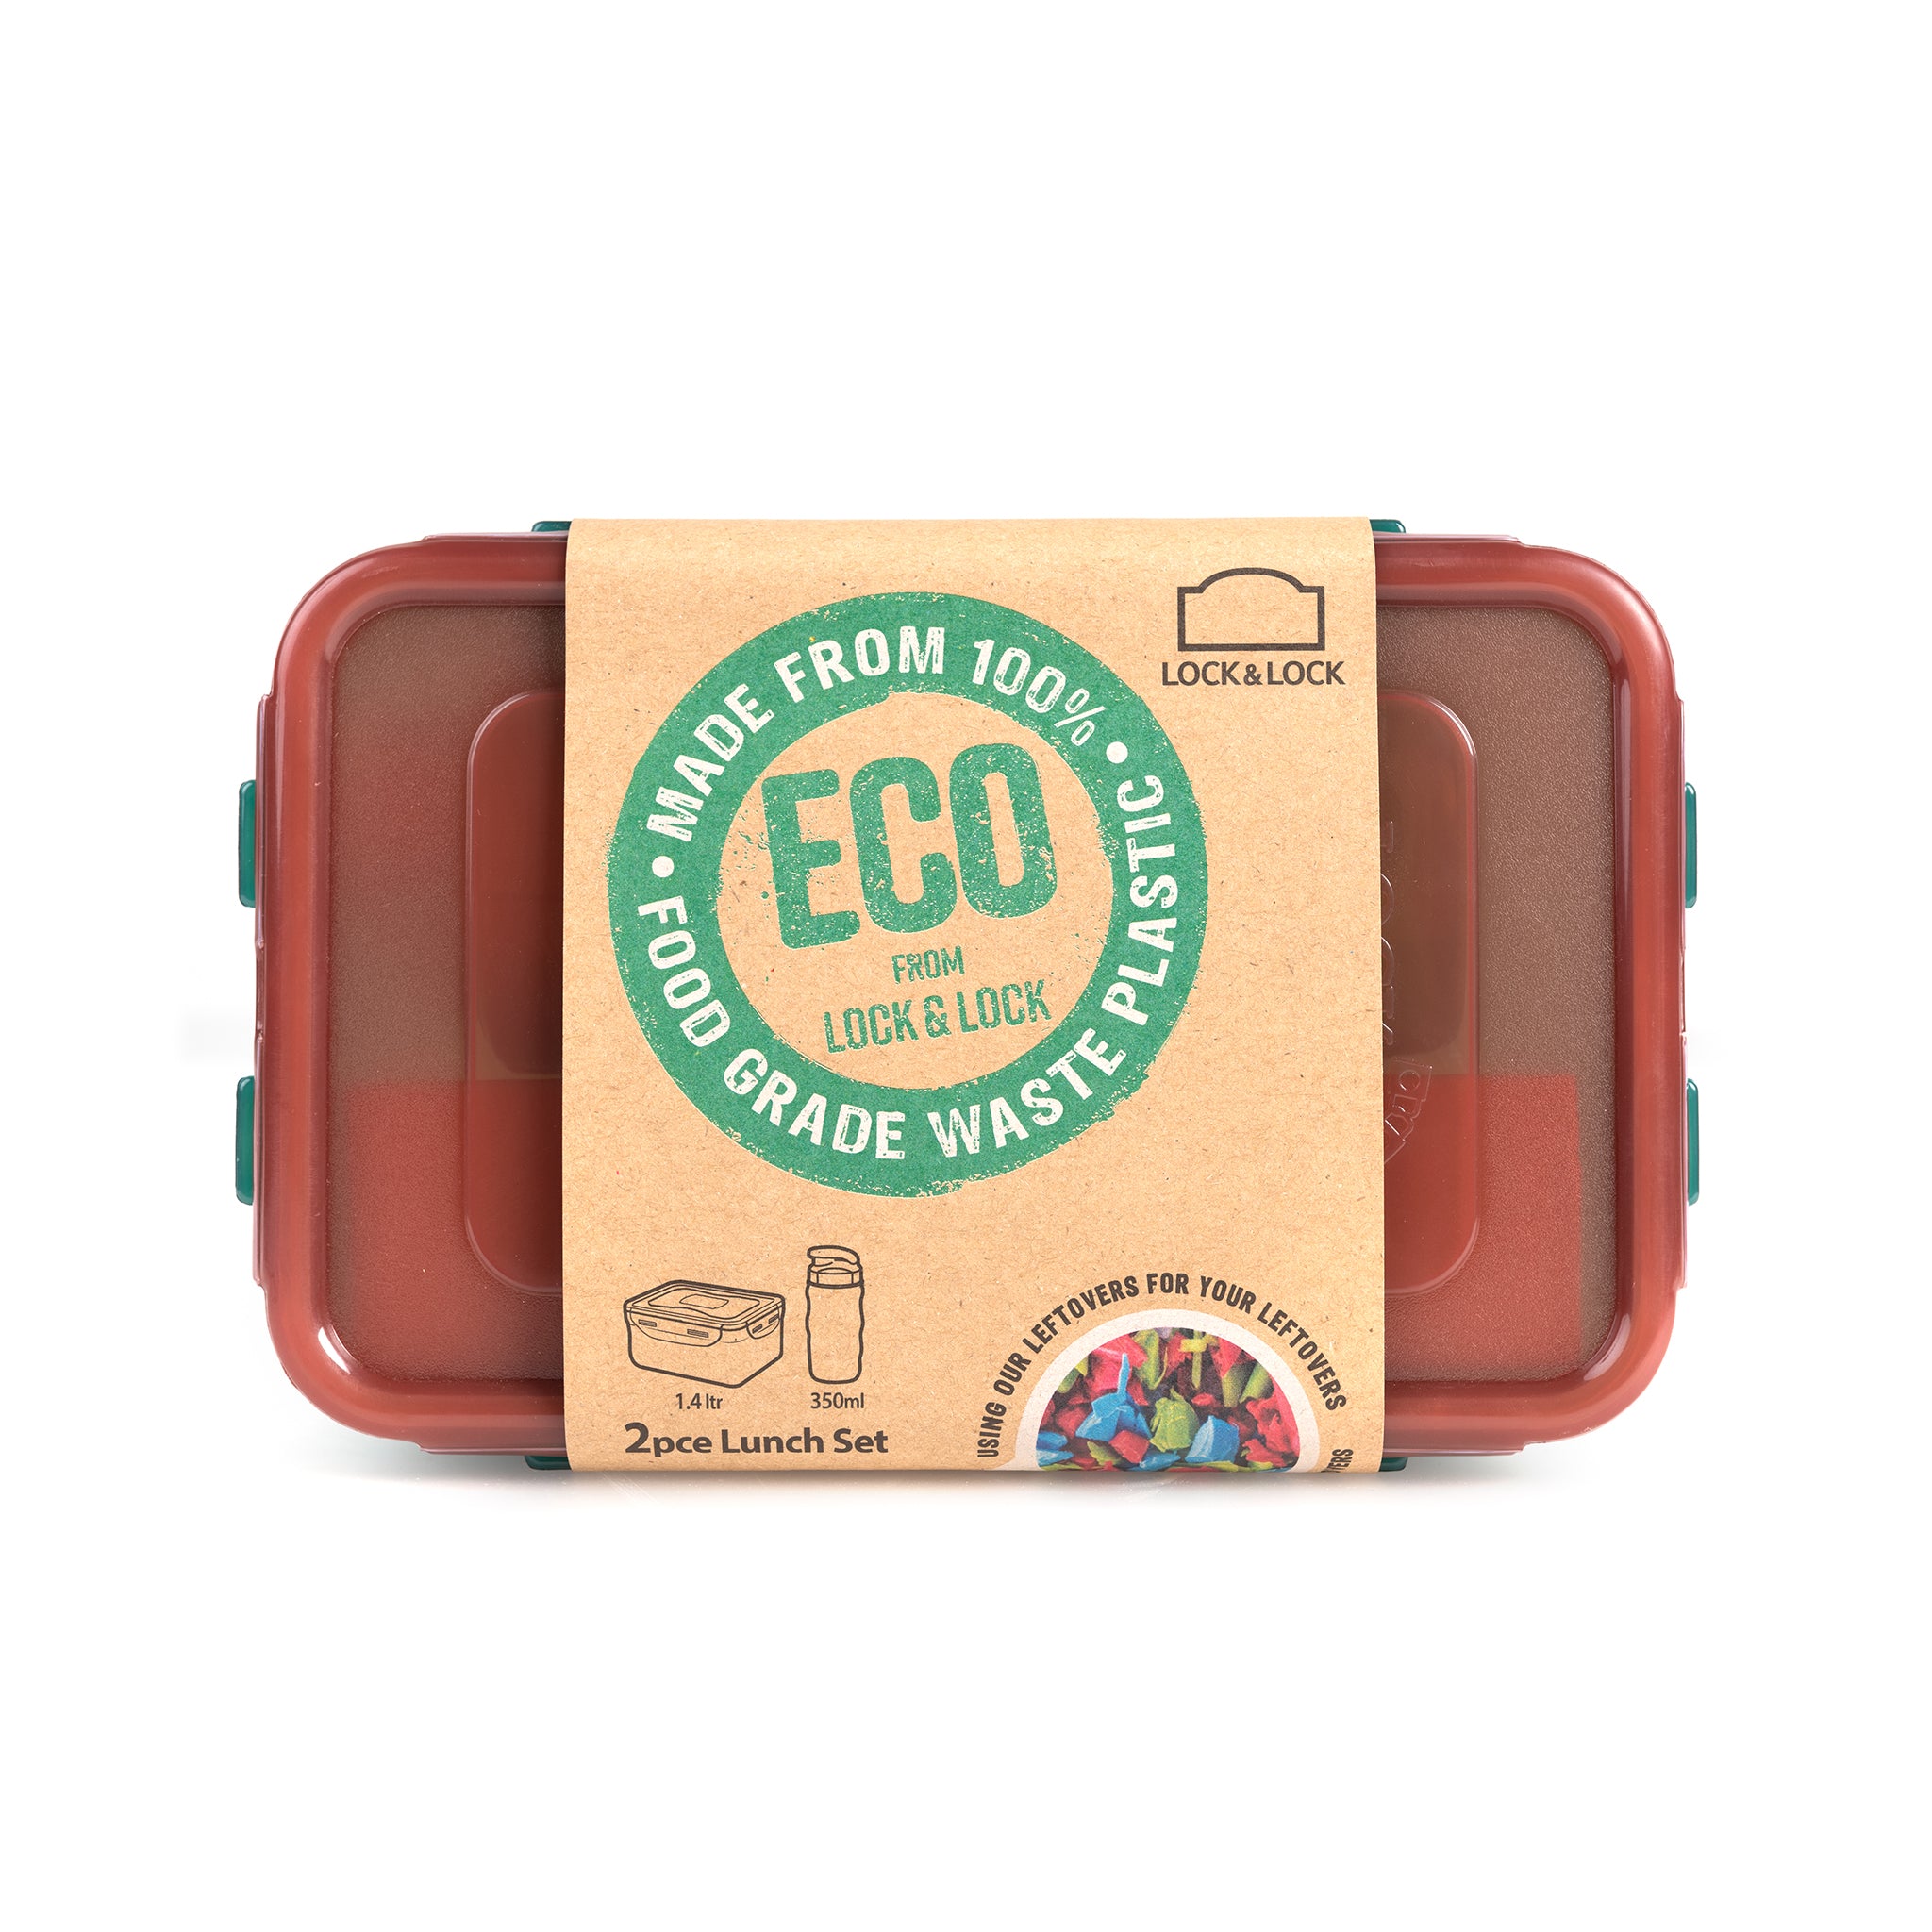 recycled plastic lunch set in packaging from top